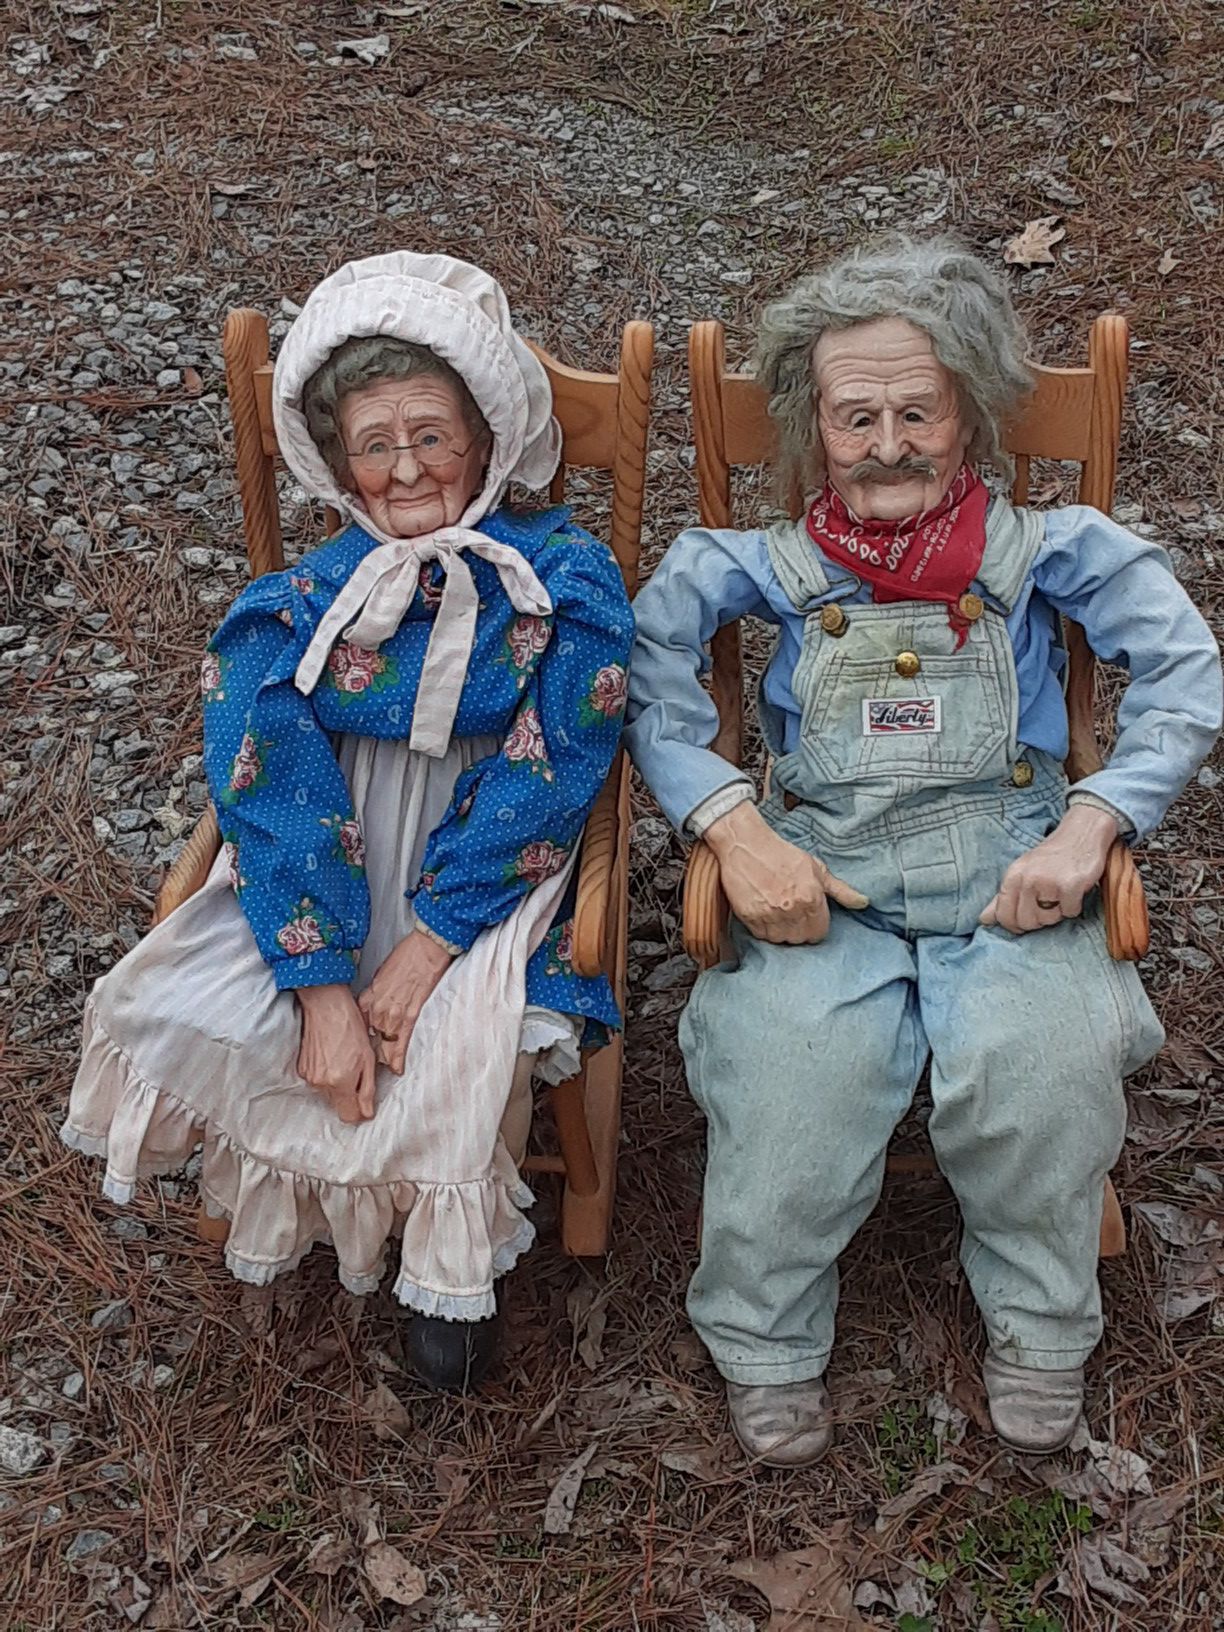 Old man and lady in rocking chairs